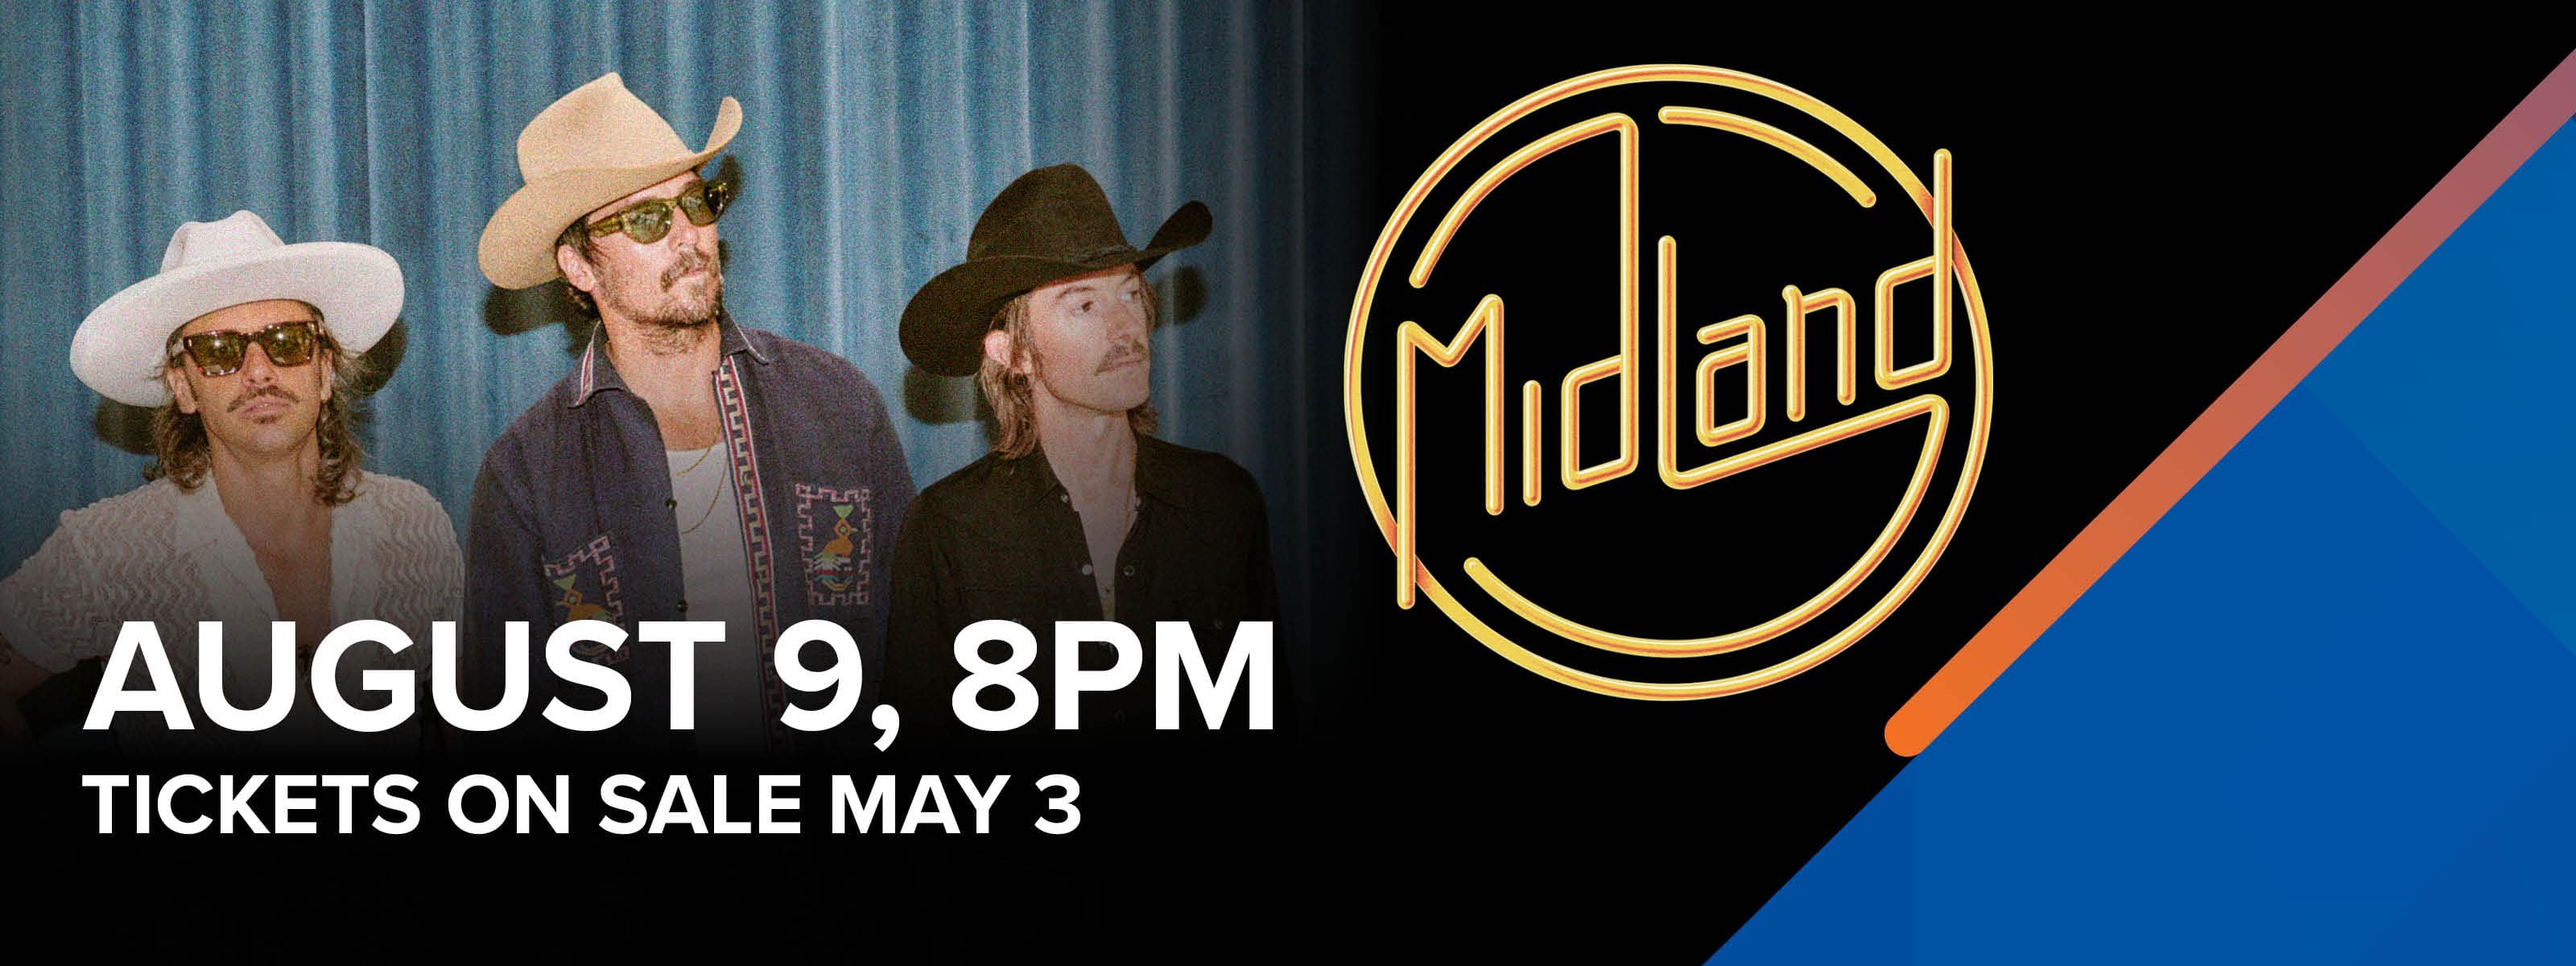 Midland August 9, 8pm - Tickets On Sale May 3